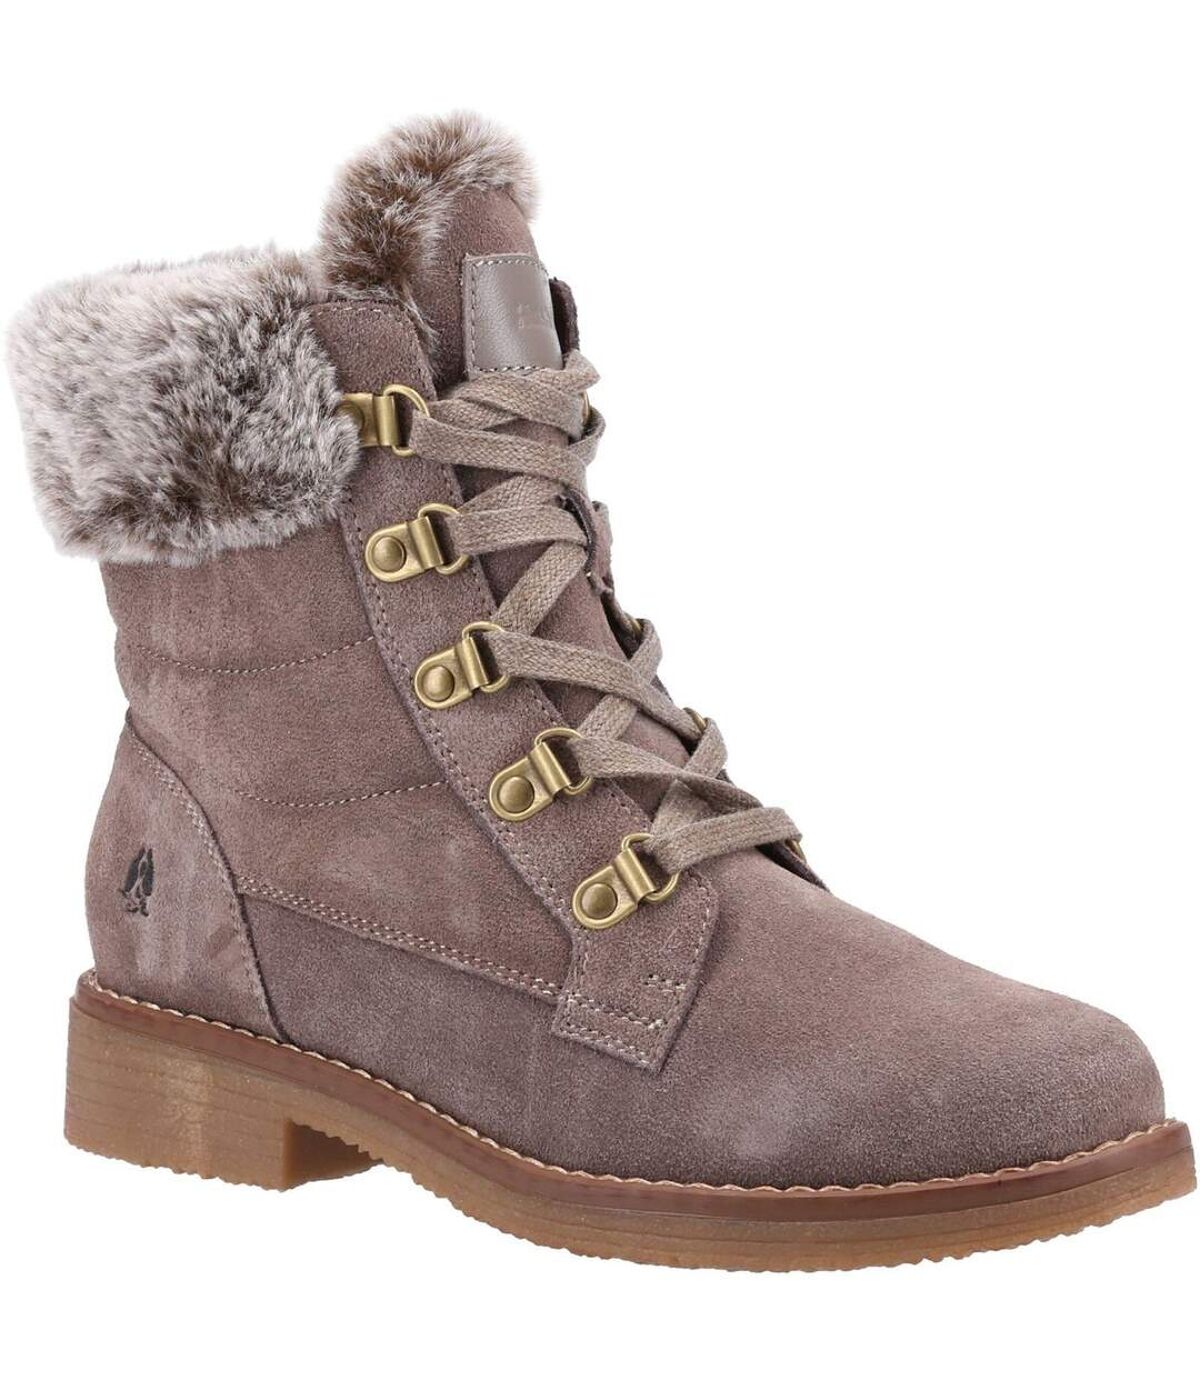 Hush Puppies Womens/Ladies Florence Mid Boots (Taupe) - UTFS8285